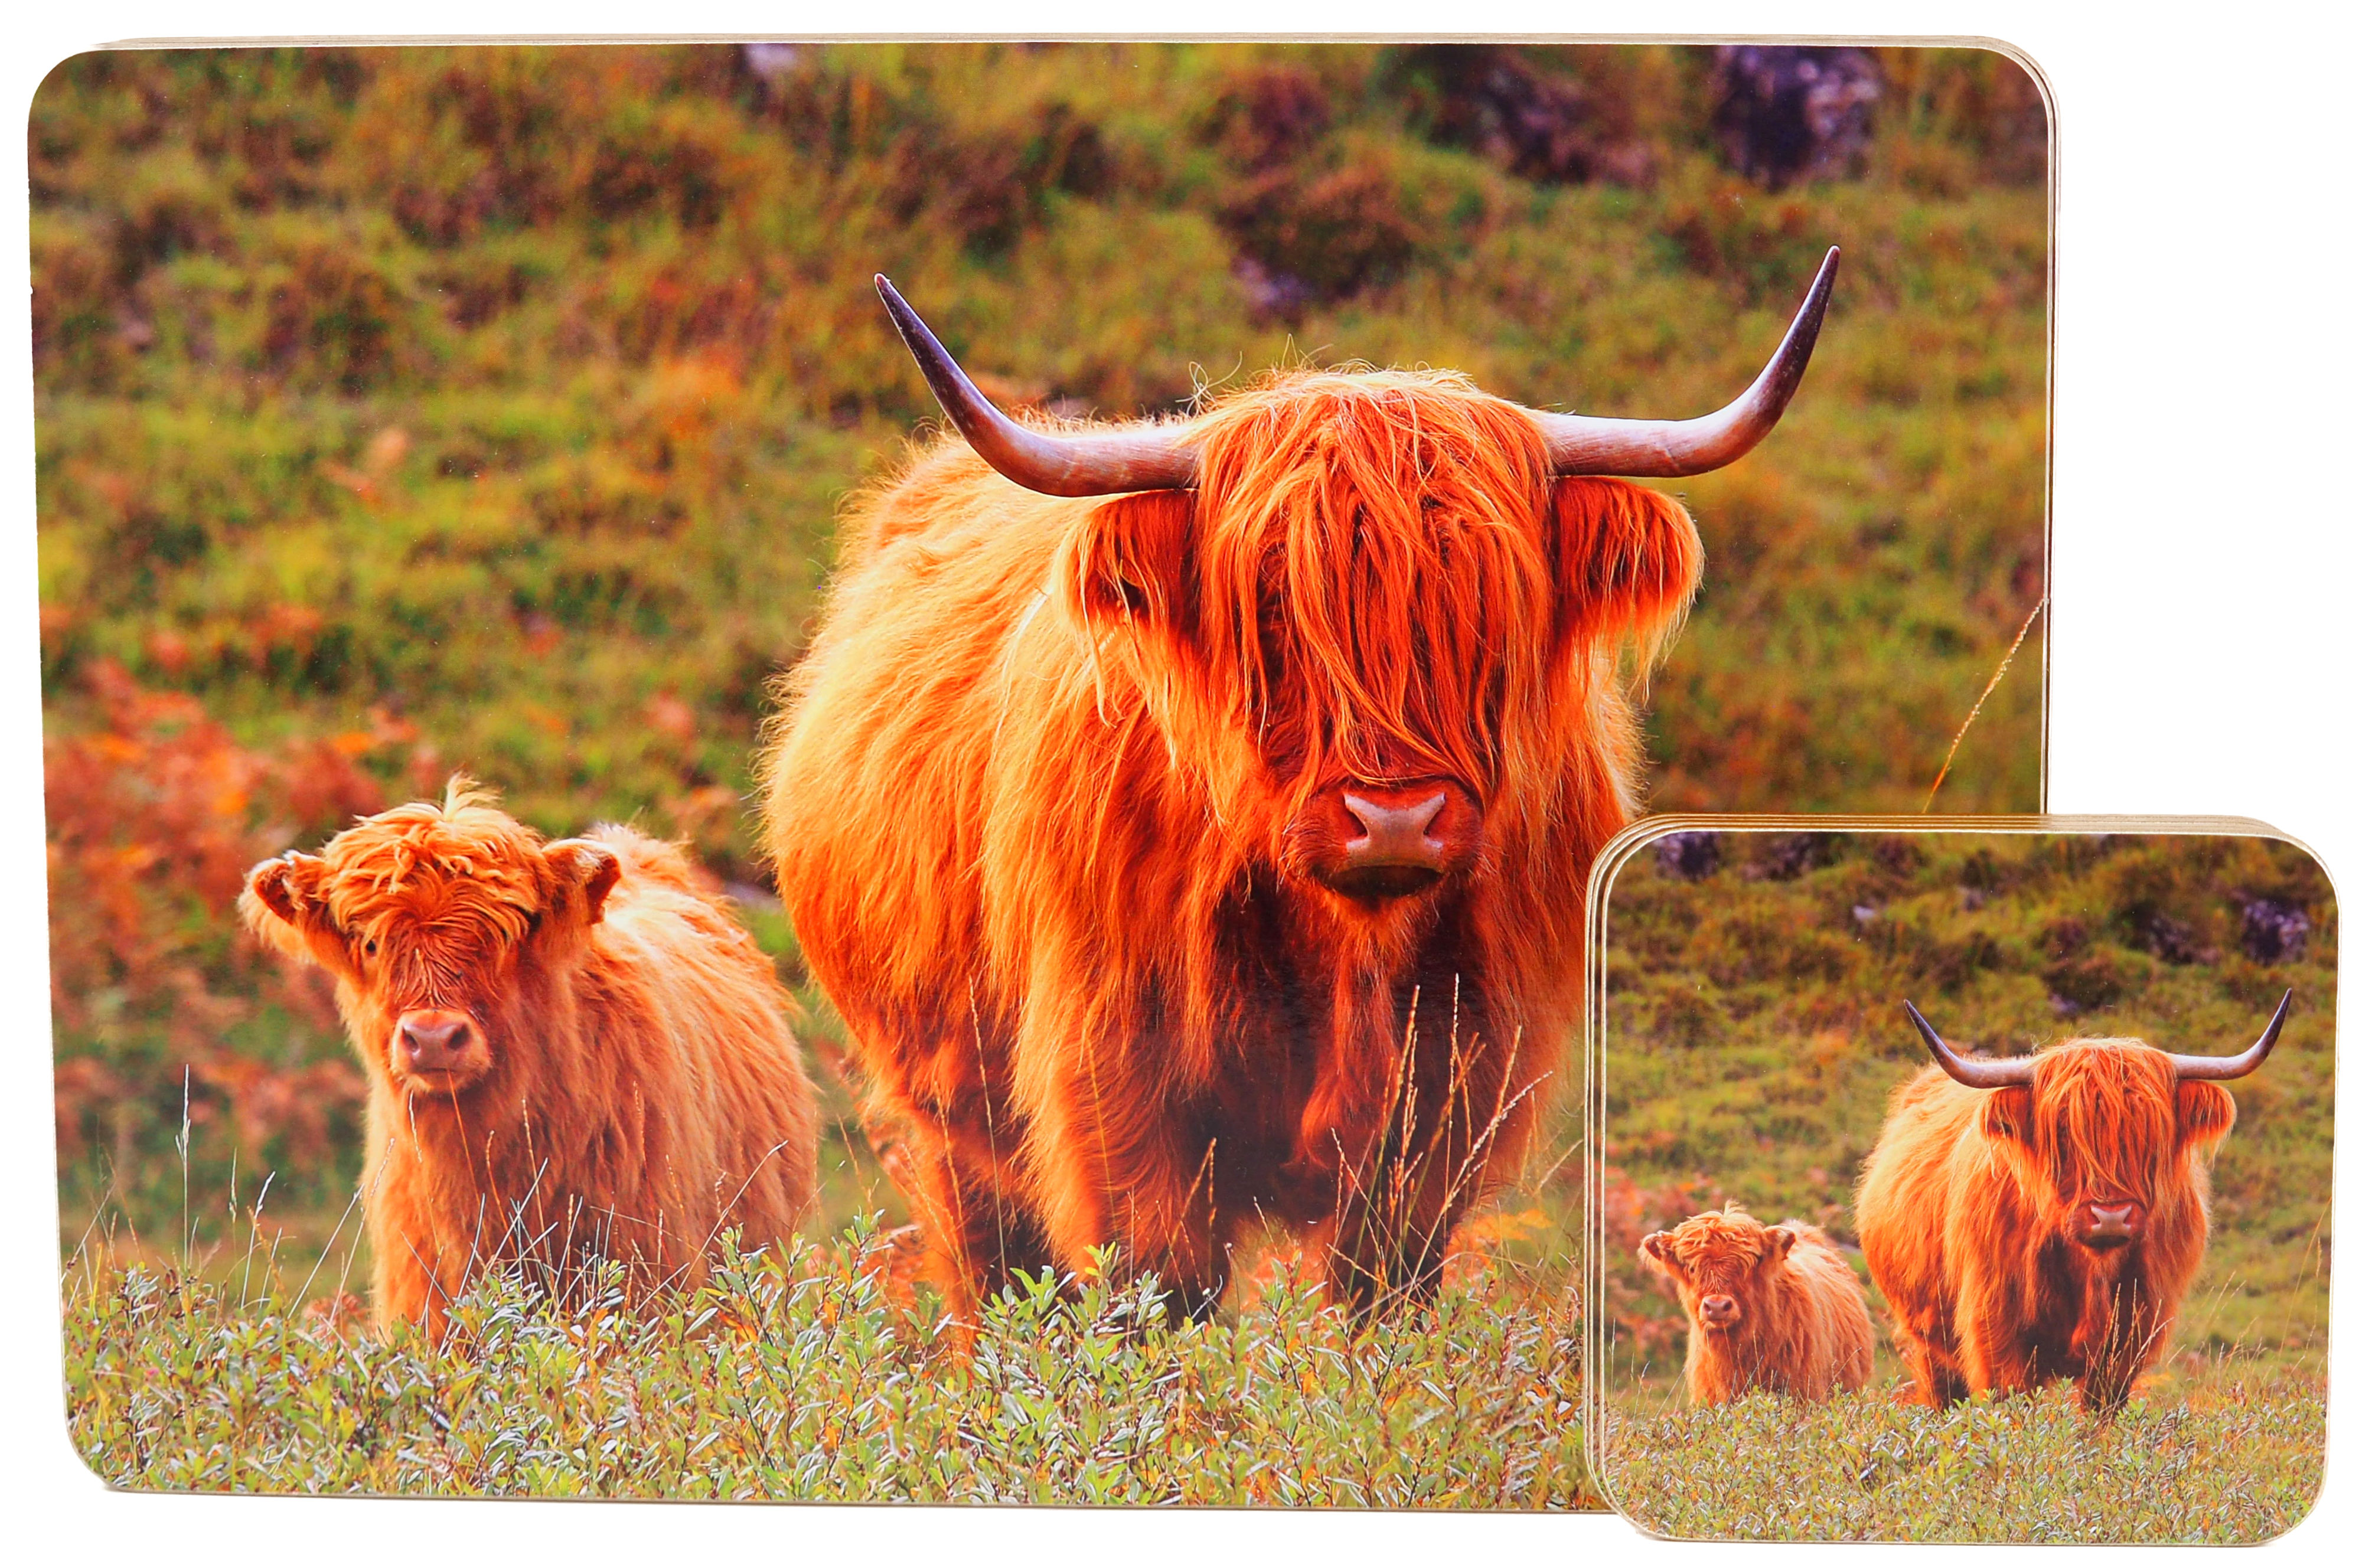 Highland Cow On Moors Scene Dinner Place Mats And 4 Coasters (Set of 4)